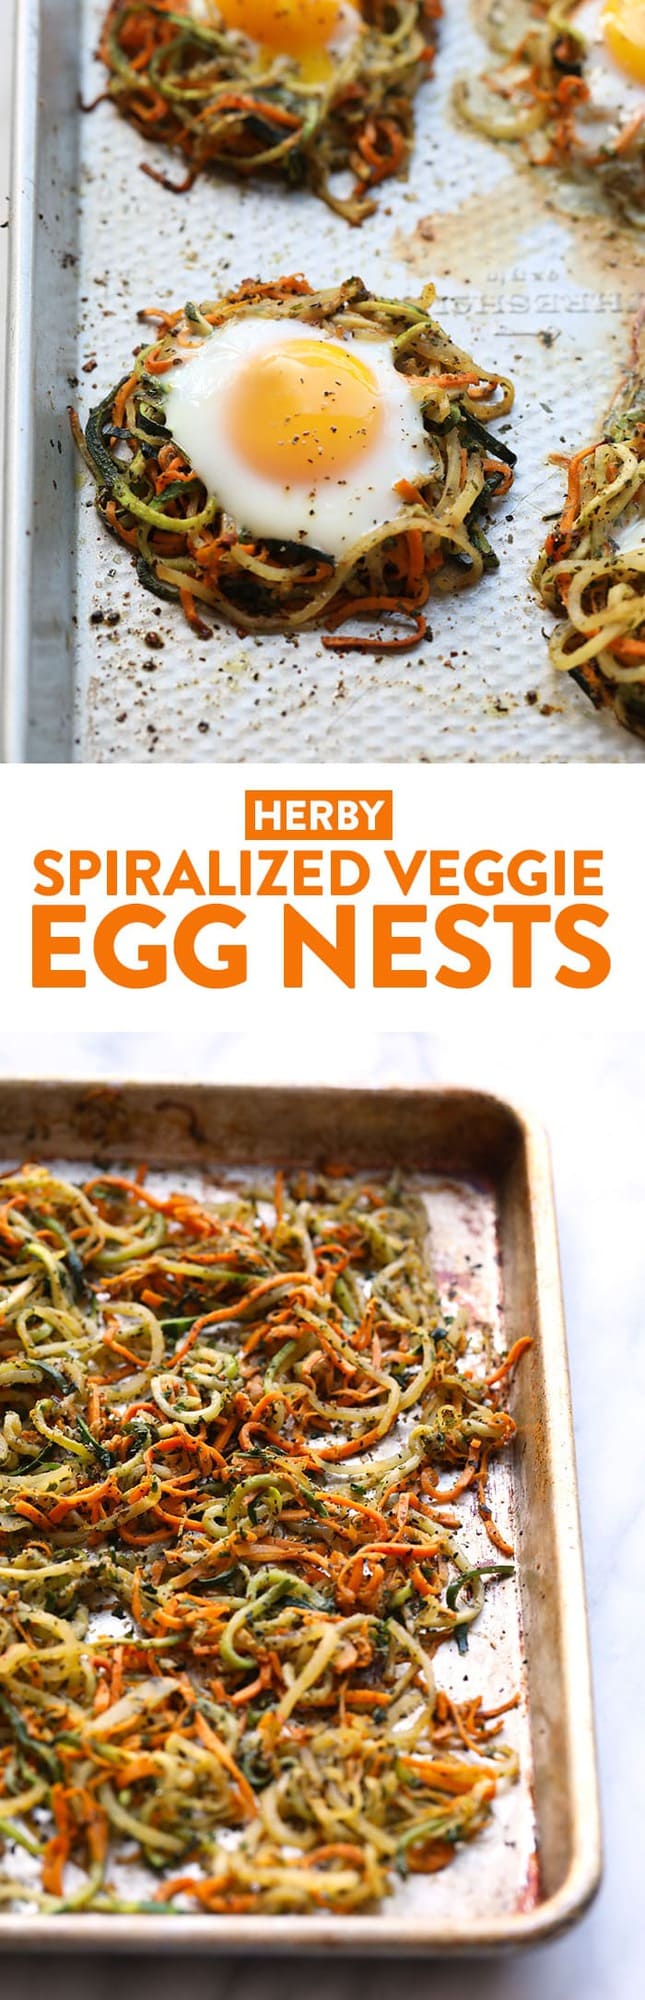 https://fitfoodiefinds.com/wp-content/uploads/2014/05/herby-spiralized-veggie-egg-nests.jpg